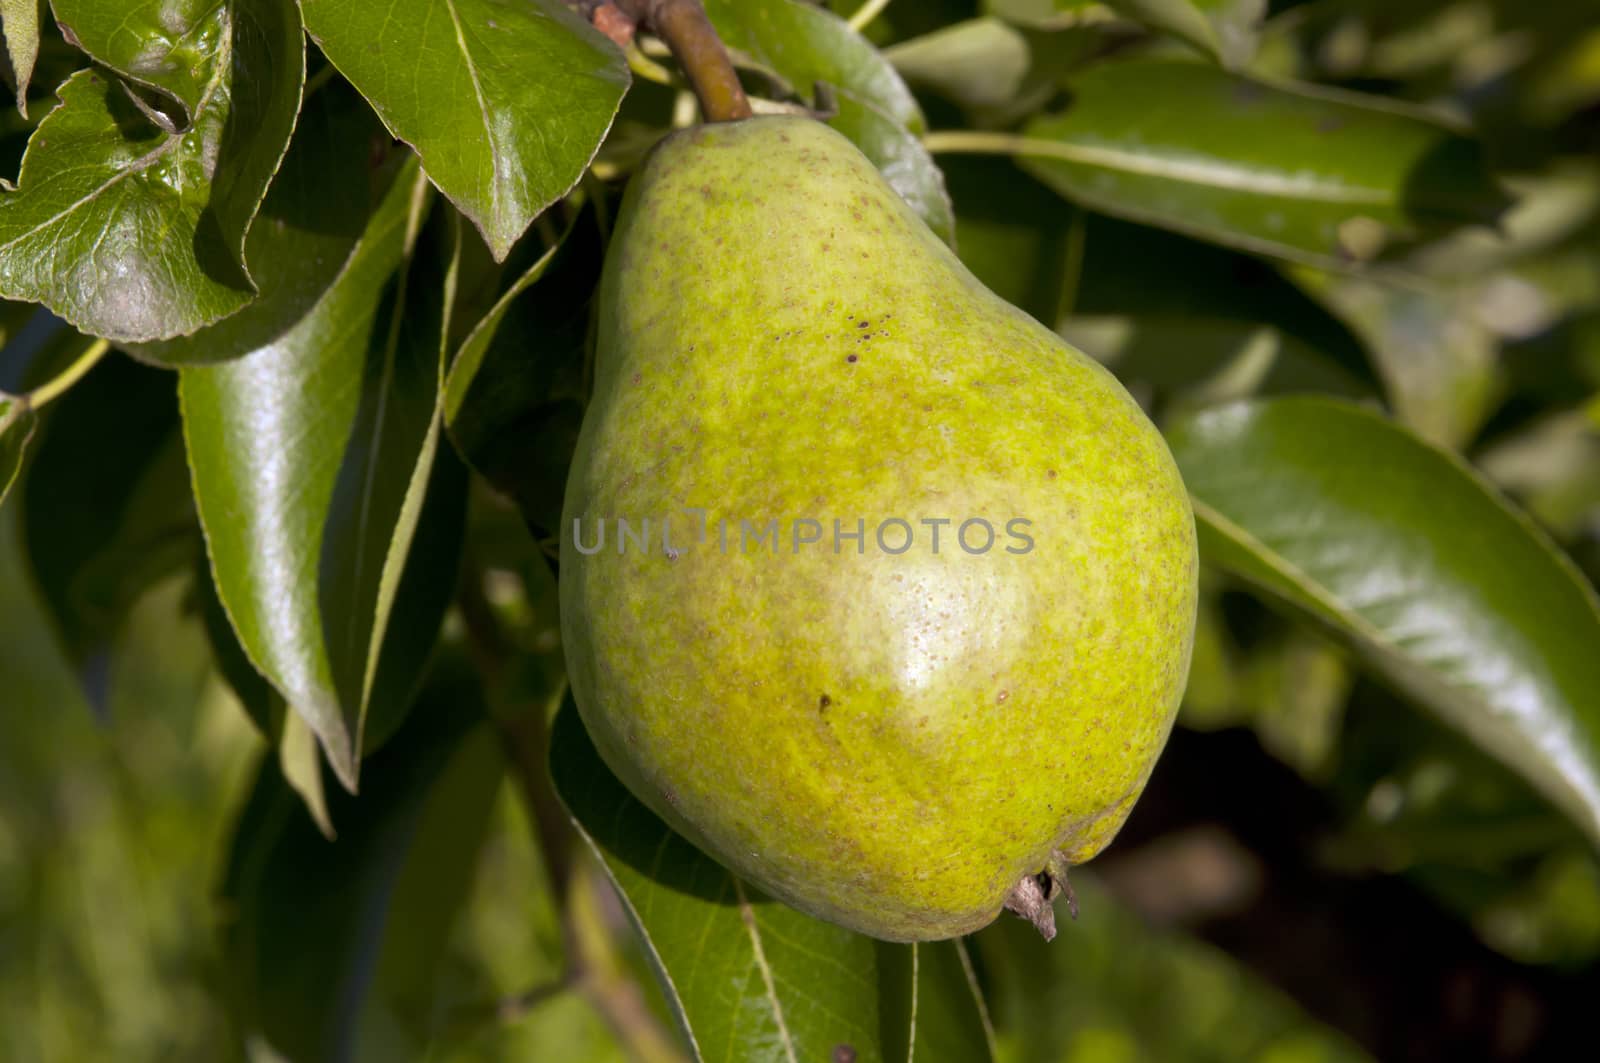 green pear hanging on a tree with leaves in the background